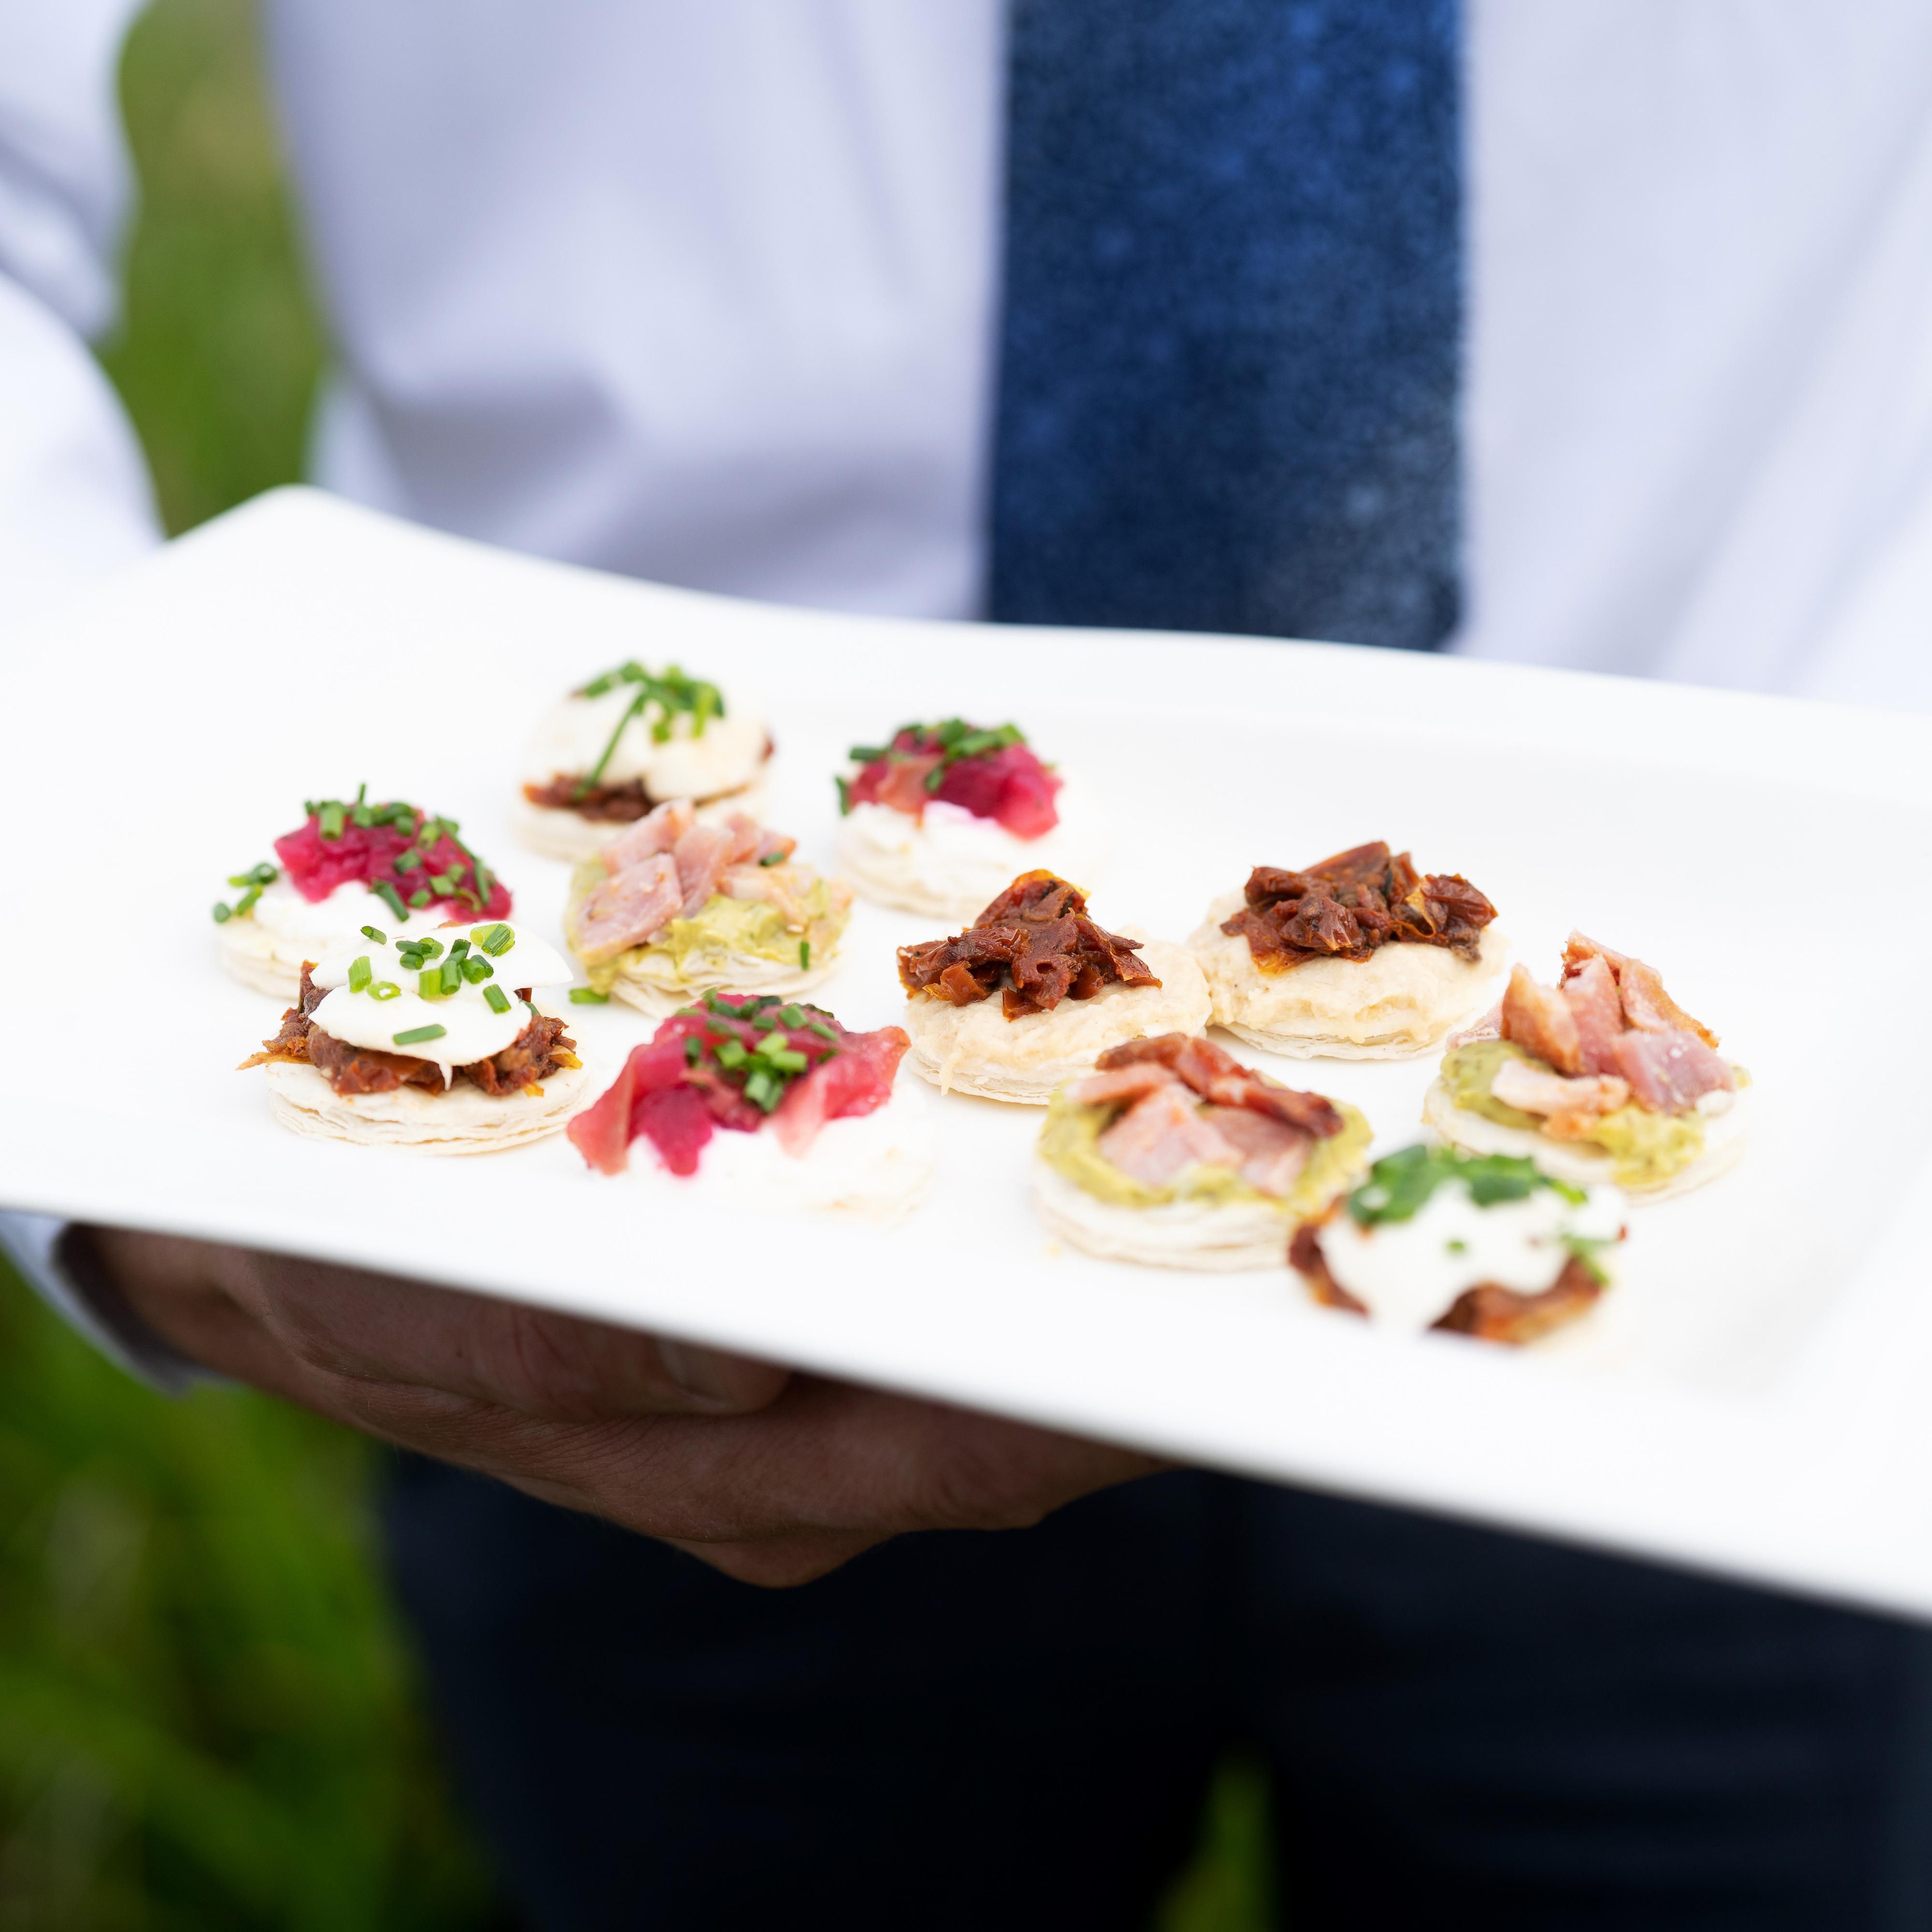 Canapes served at a wedding reception